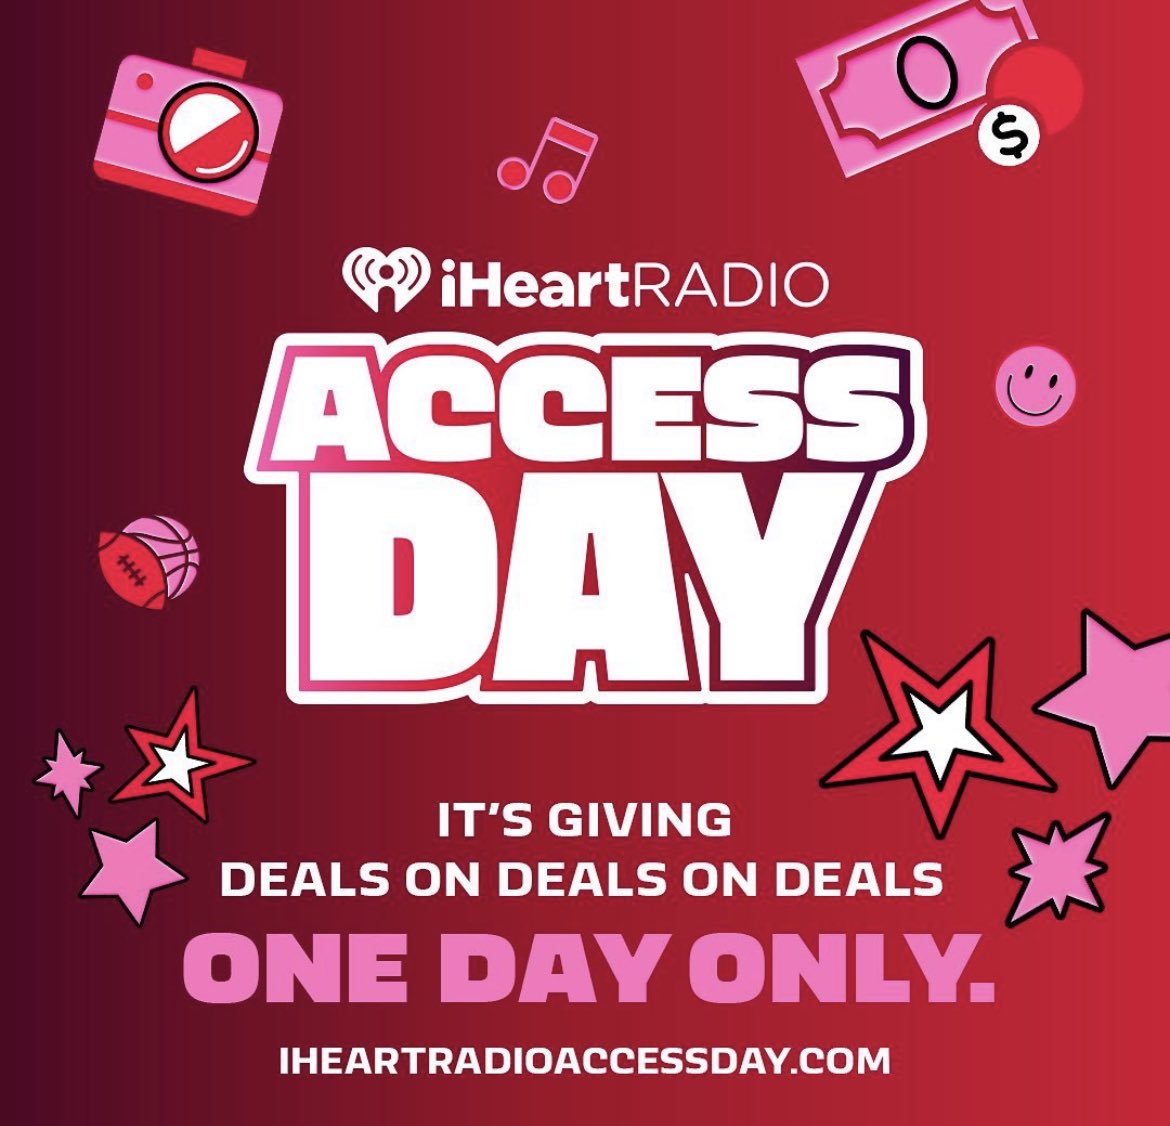 from trips to our @iHeartFestival and VIP @rockthesouth tickets, one day only to take advantage of @iheartradio Access Day! ✈️ 🎁 🎸 #iHeartAccessDay 

iHeartRadioAccessDay.com